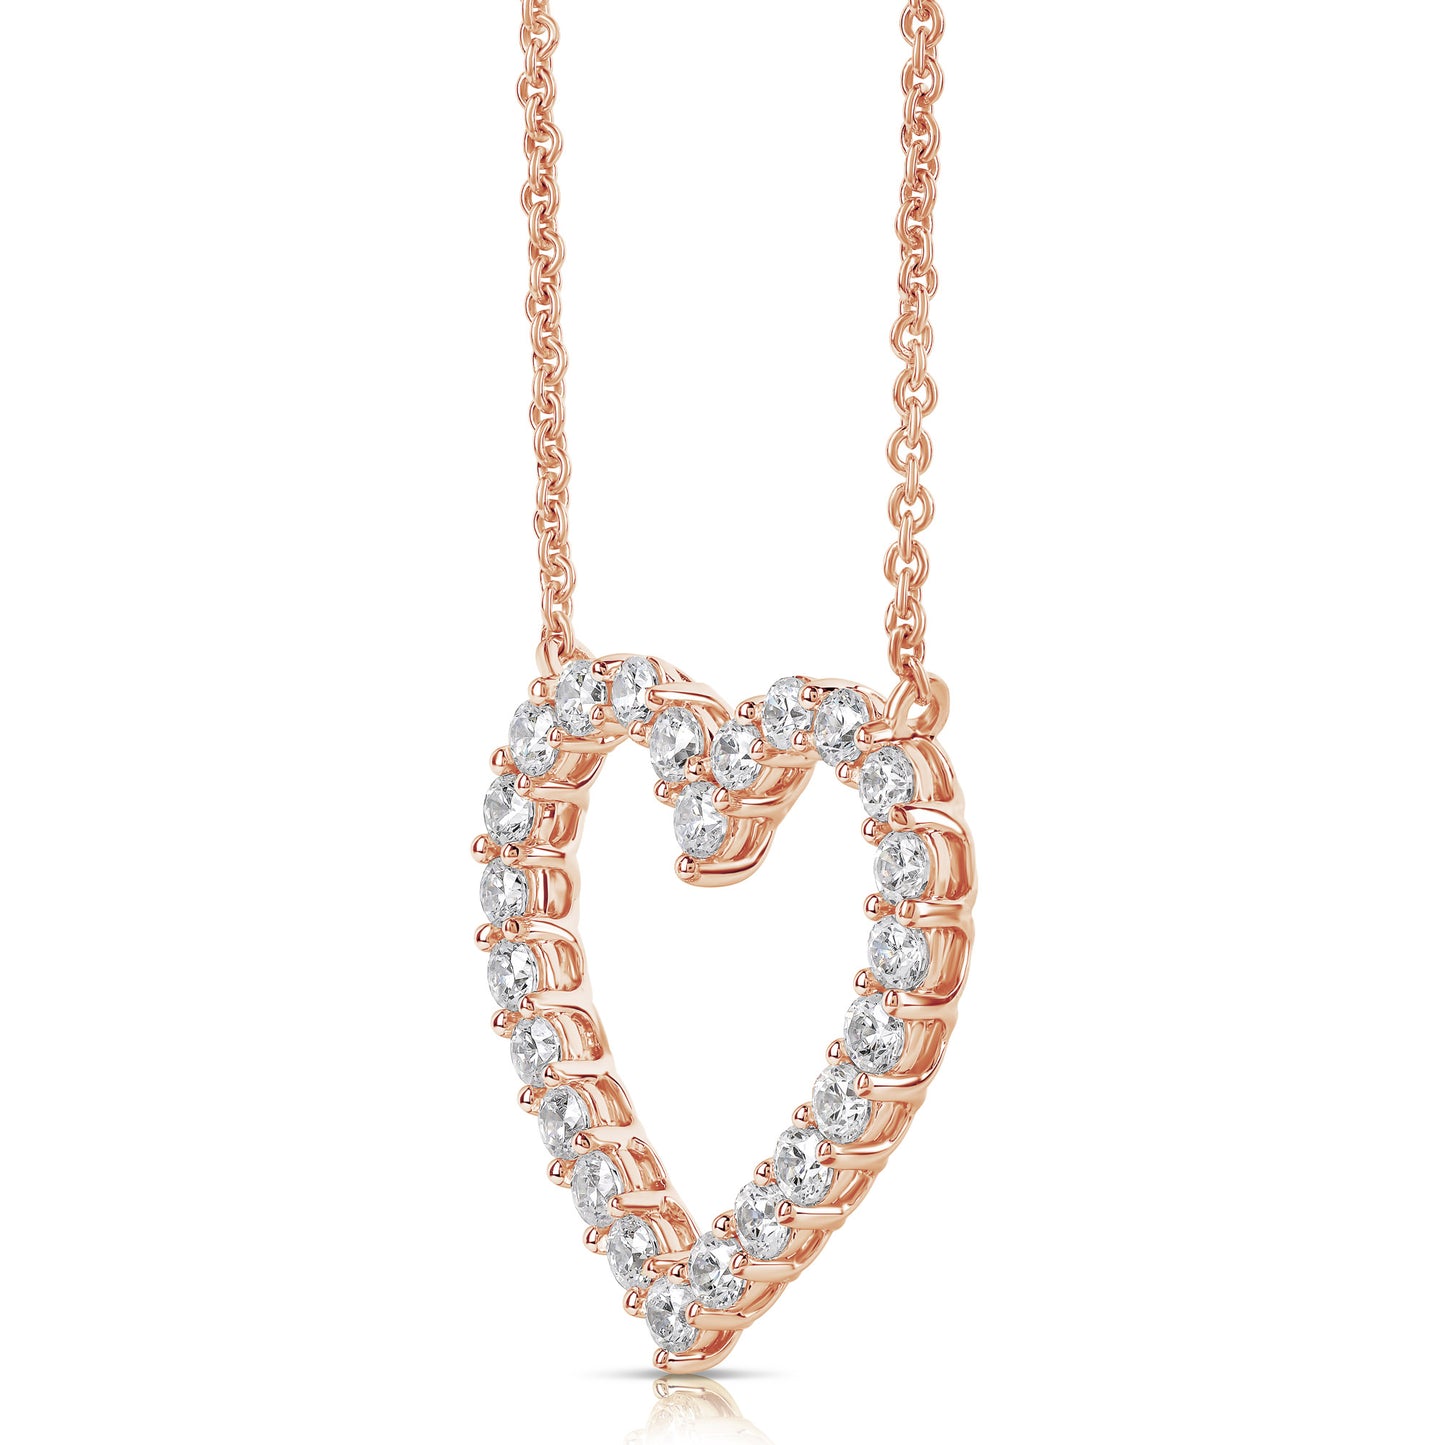 1 1/2 CT COLORLESS FLAWLESS HEART SHAPED PENDANT